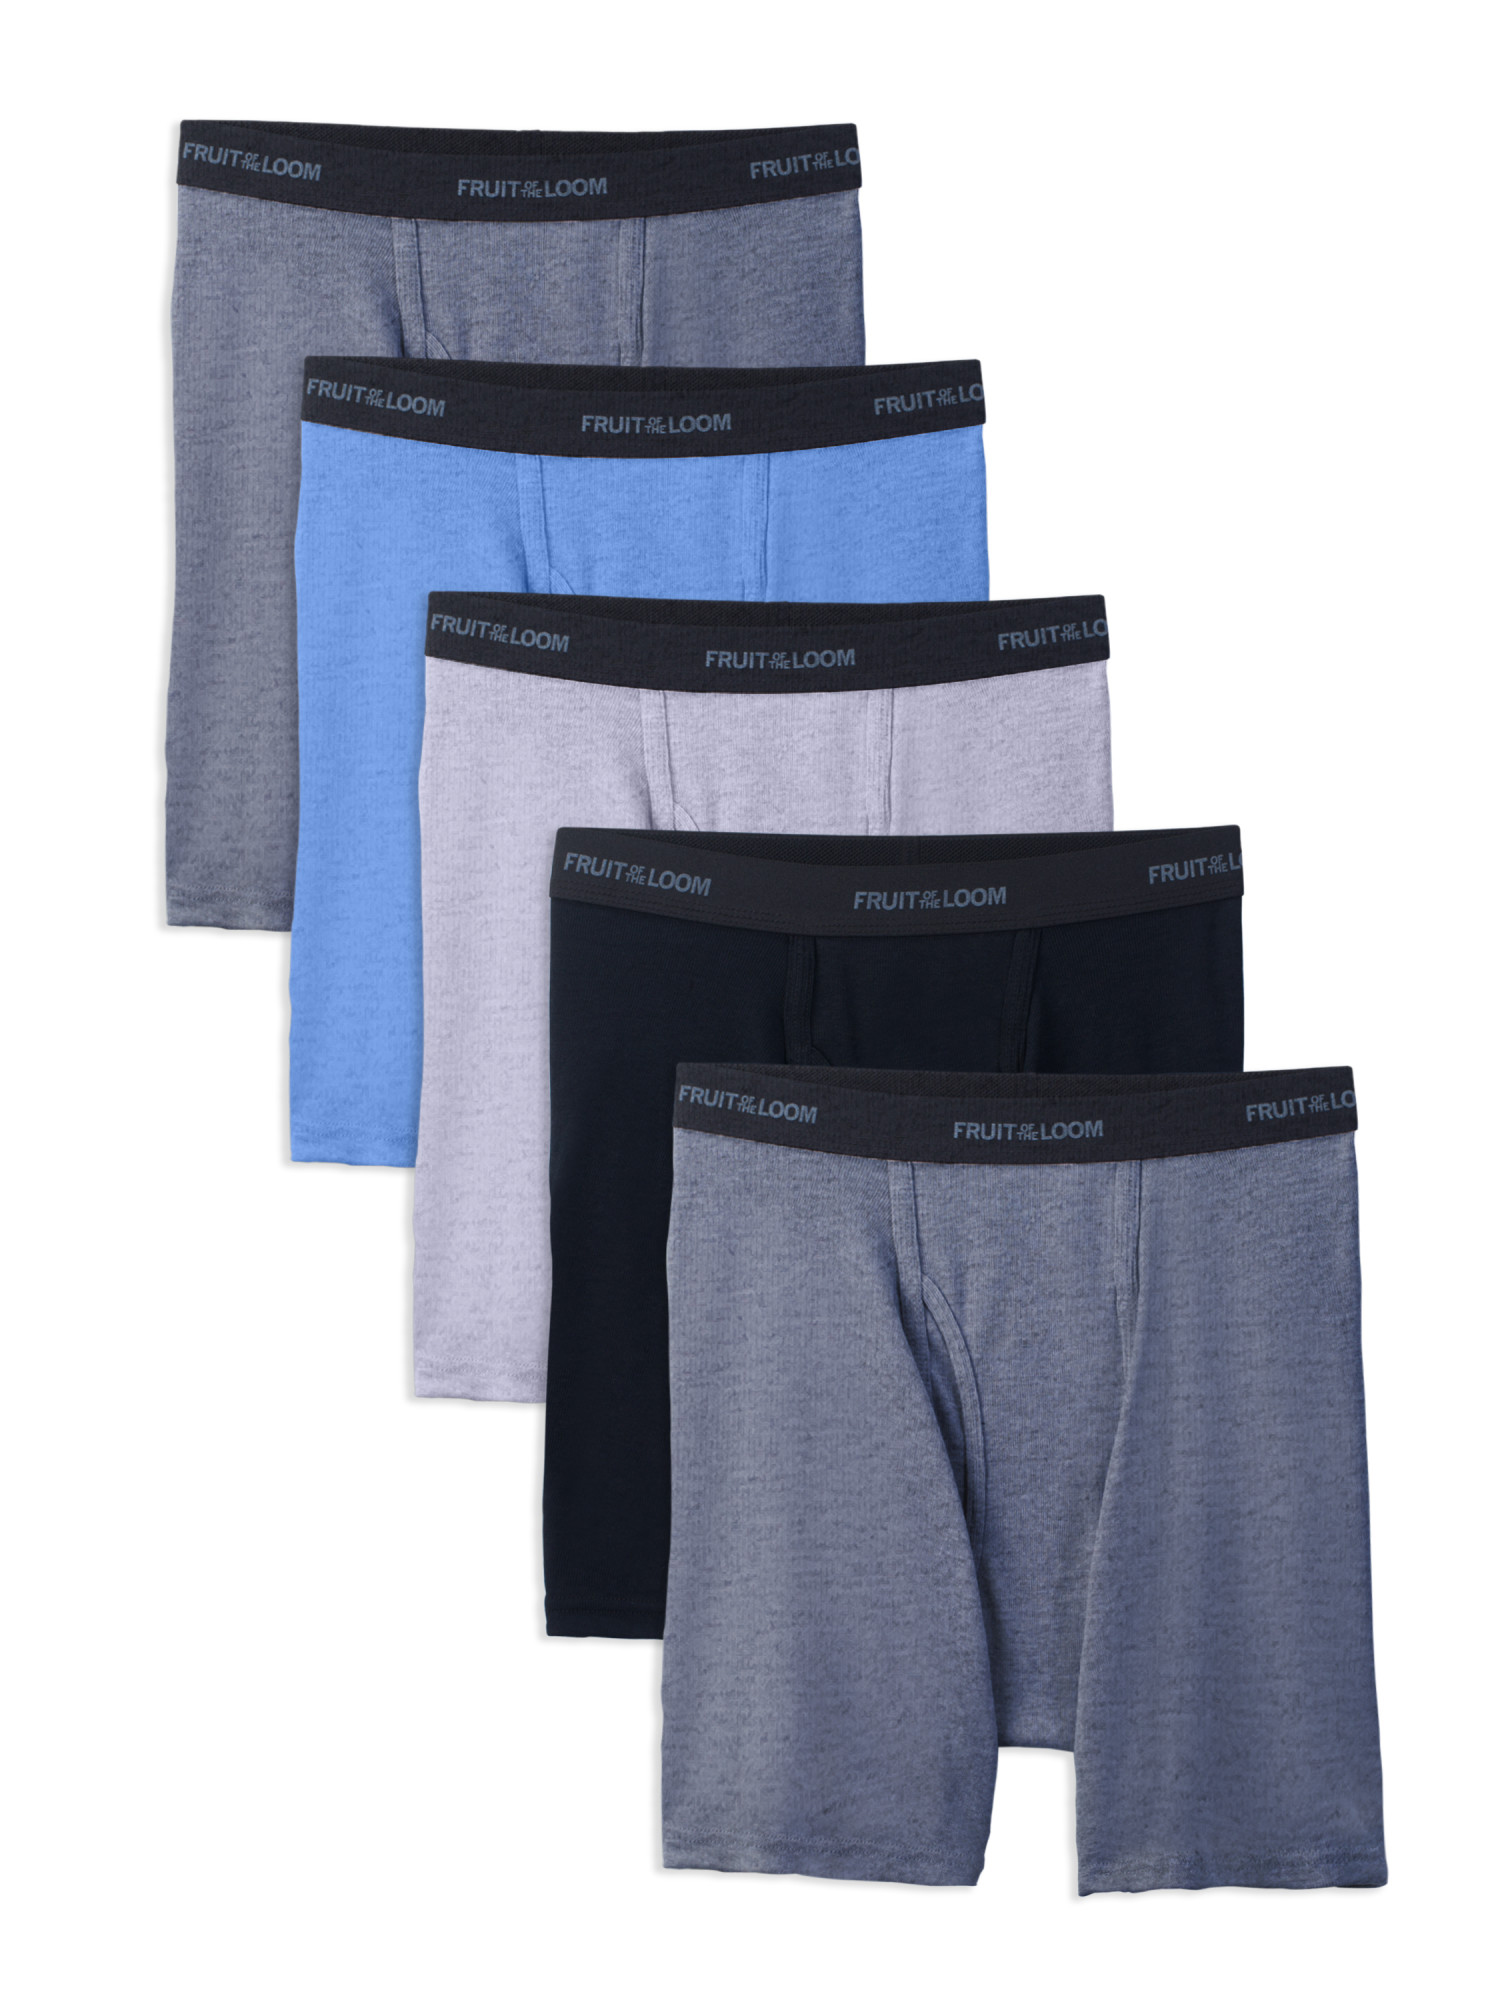 Fruit of the Loom Men's Beyondsoft Assorted Boxer Briefs, 5 Pack - image 1 of 7